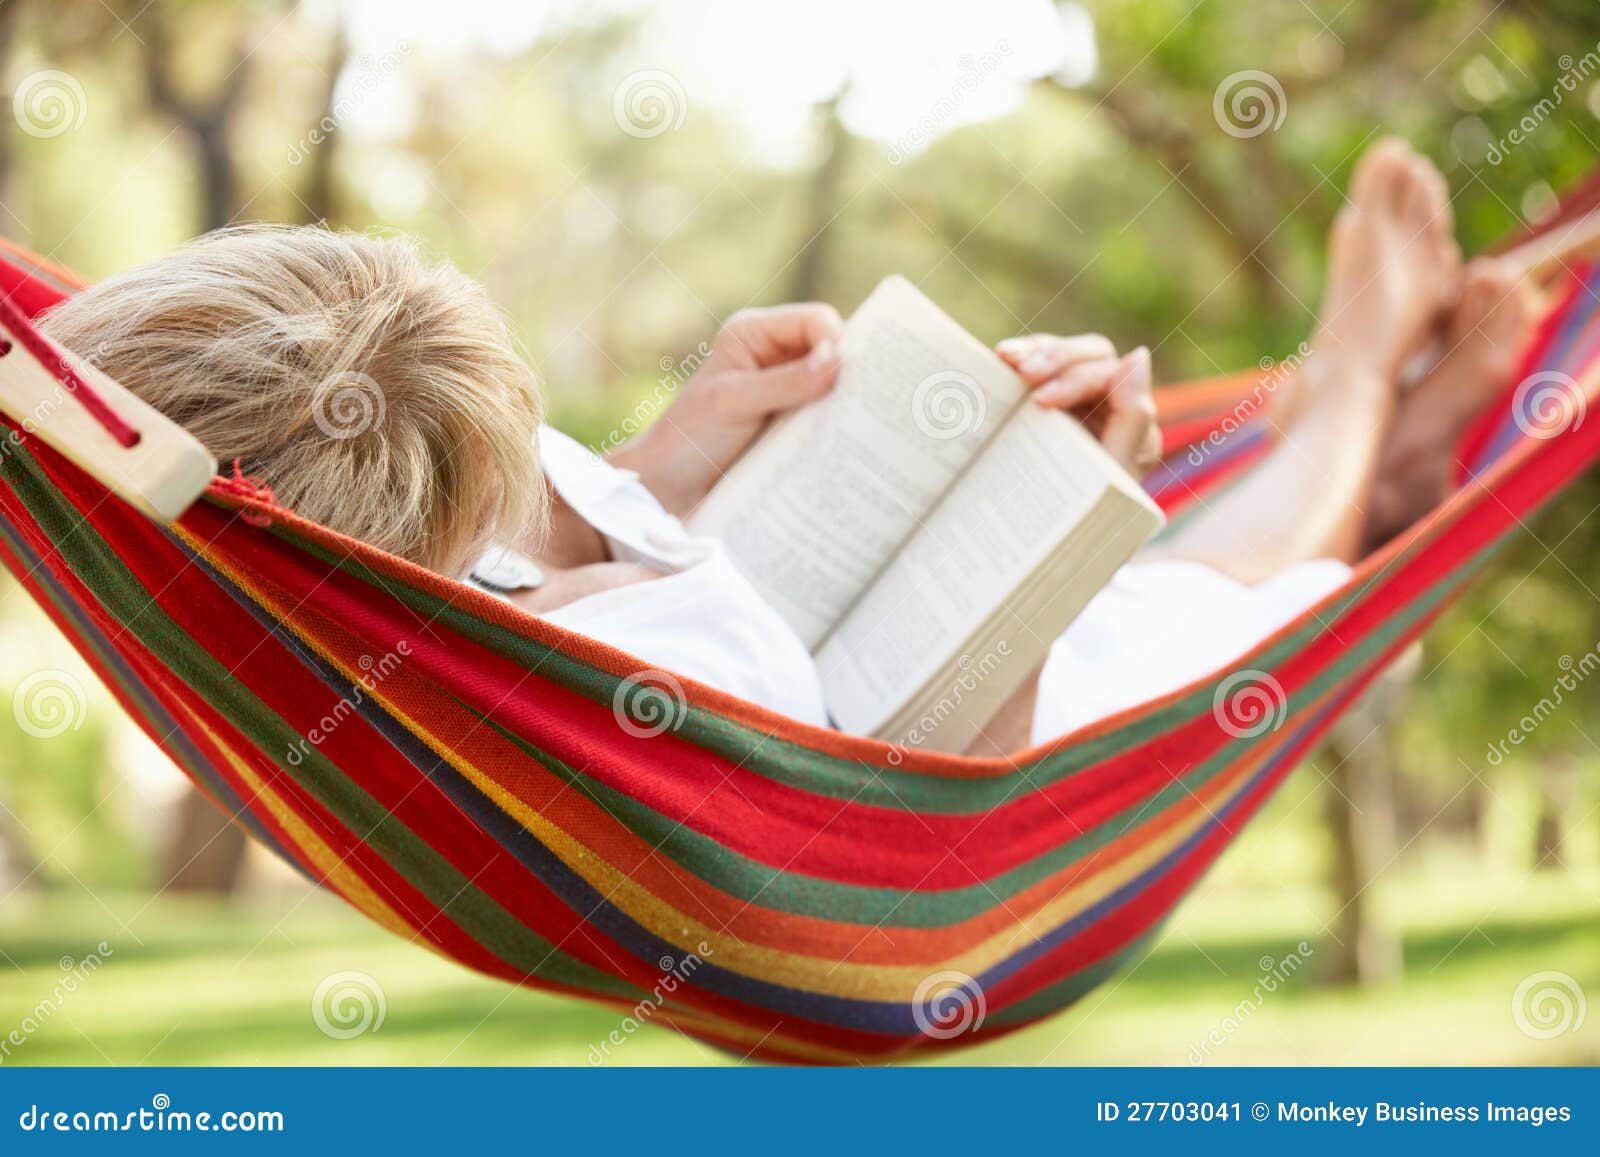 senior woman relaxing in hammock with book